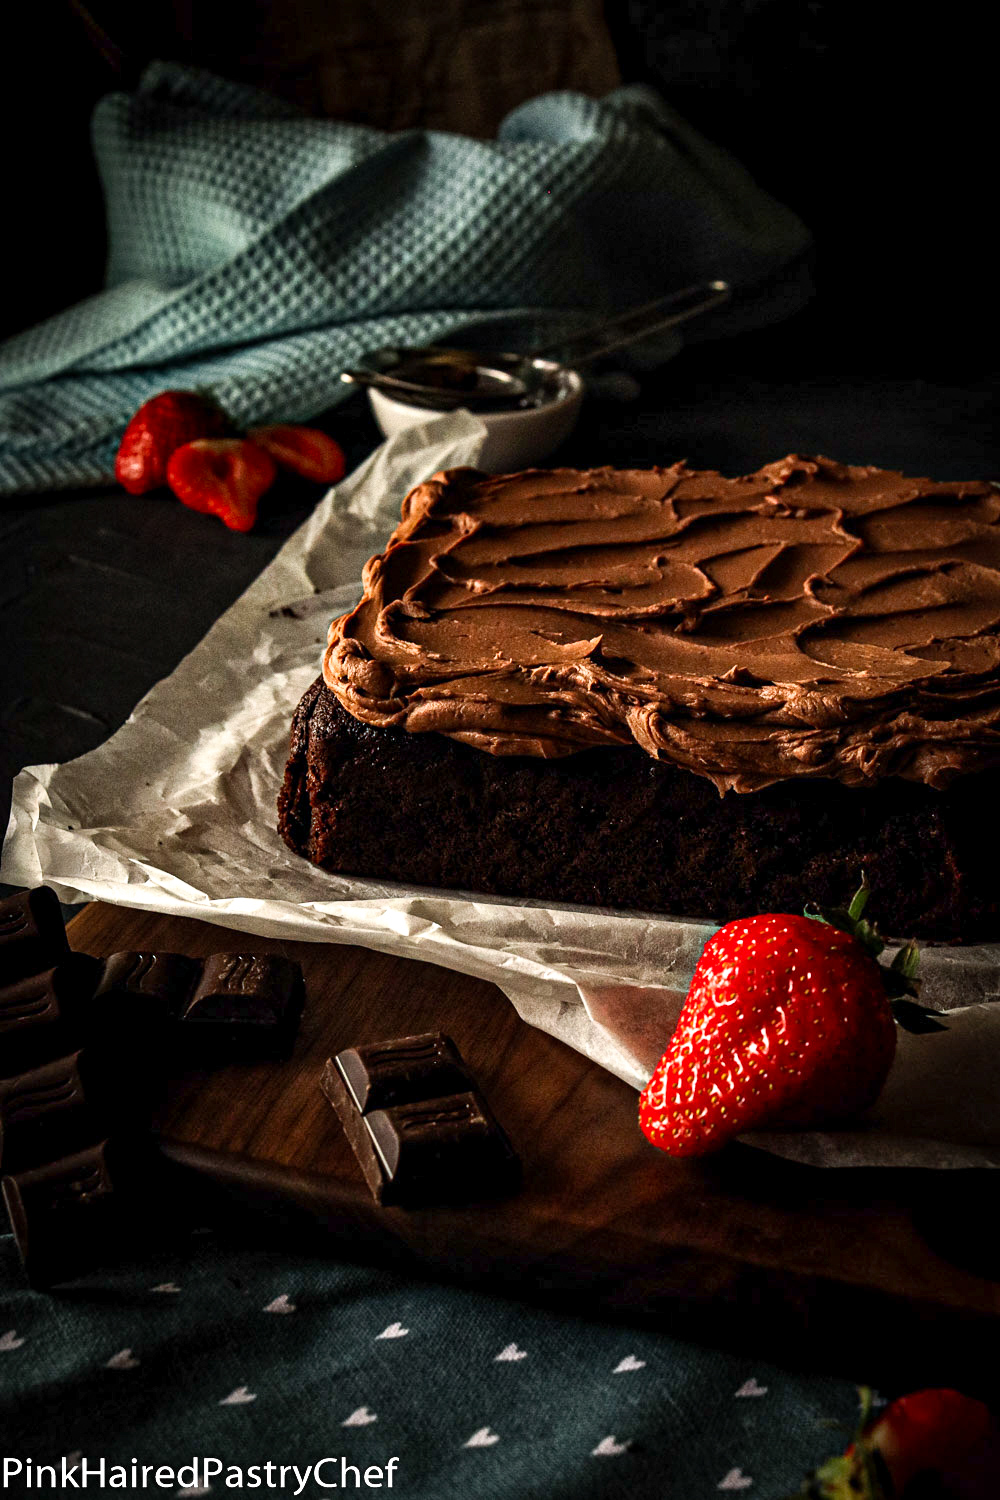 Chocolate Square Cake with Whipped Chocolate Ganache generously swirled on top. Cake resting on a piece of baking parchment. Strawberries for decoration